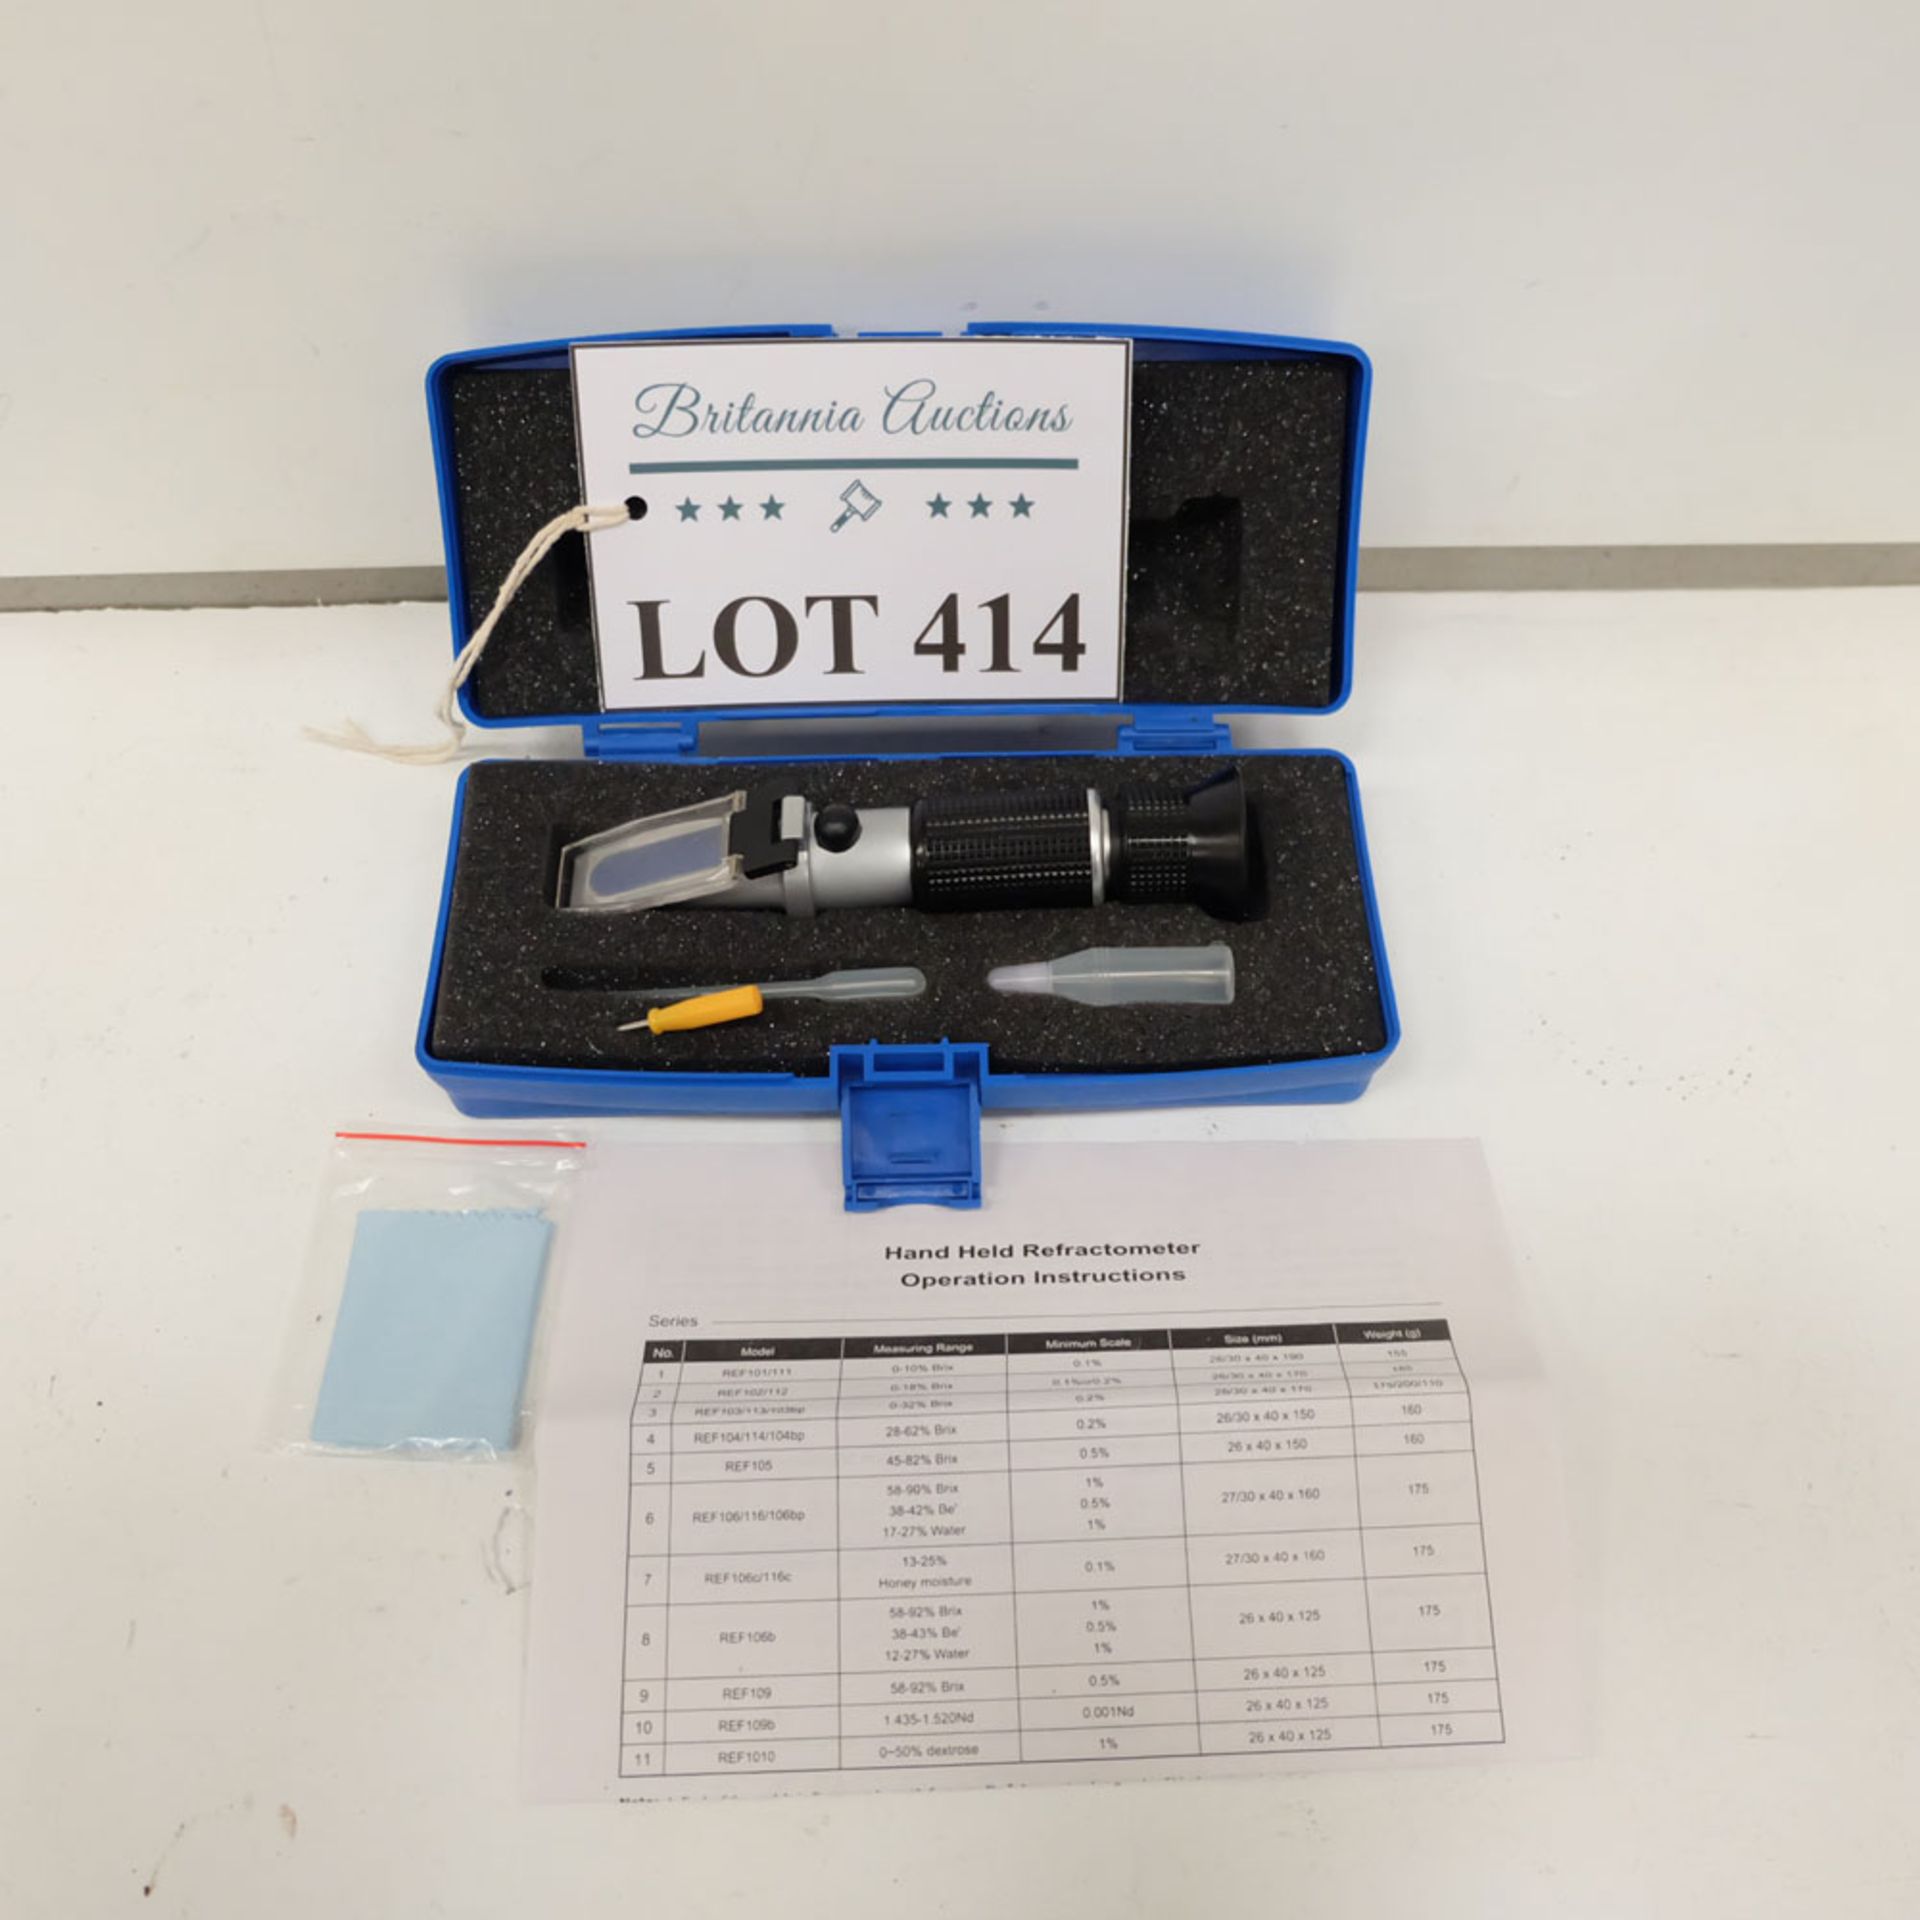 Hand-Held Refractometer. Boxed with Accessories.